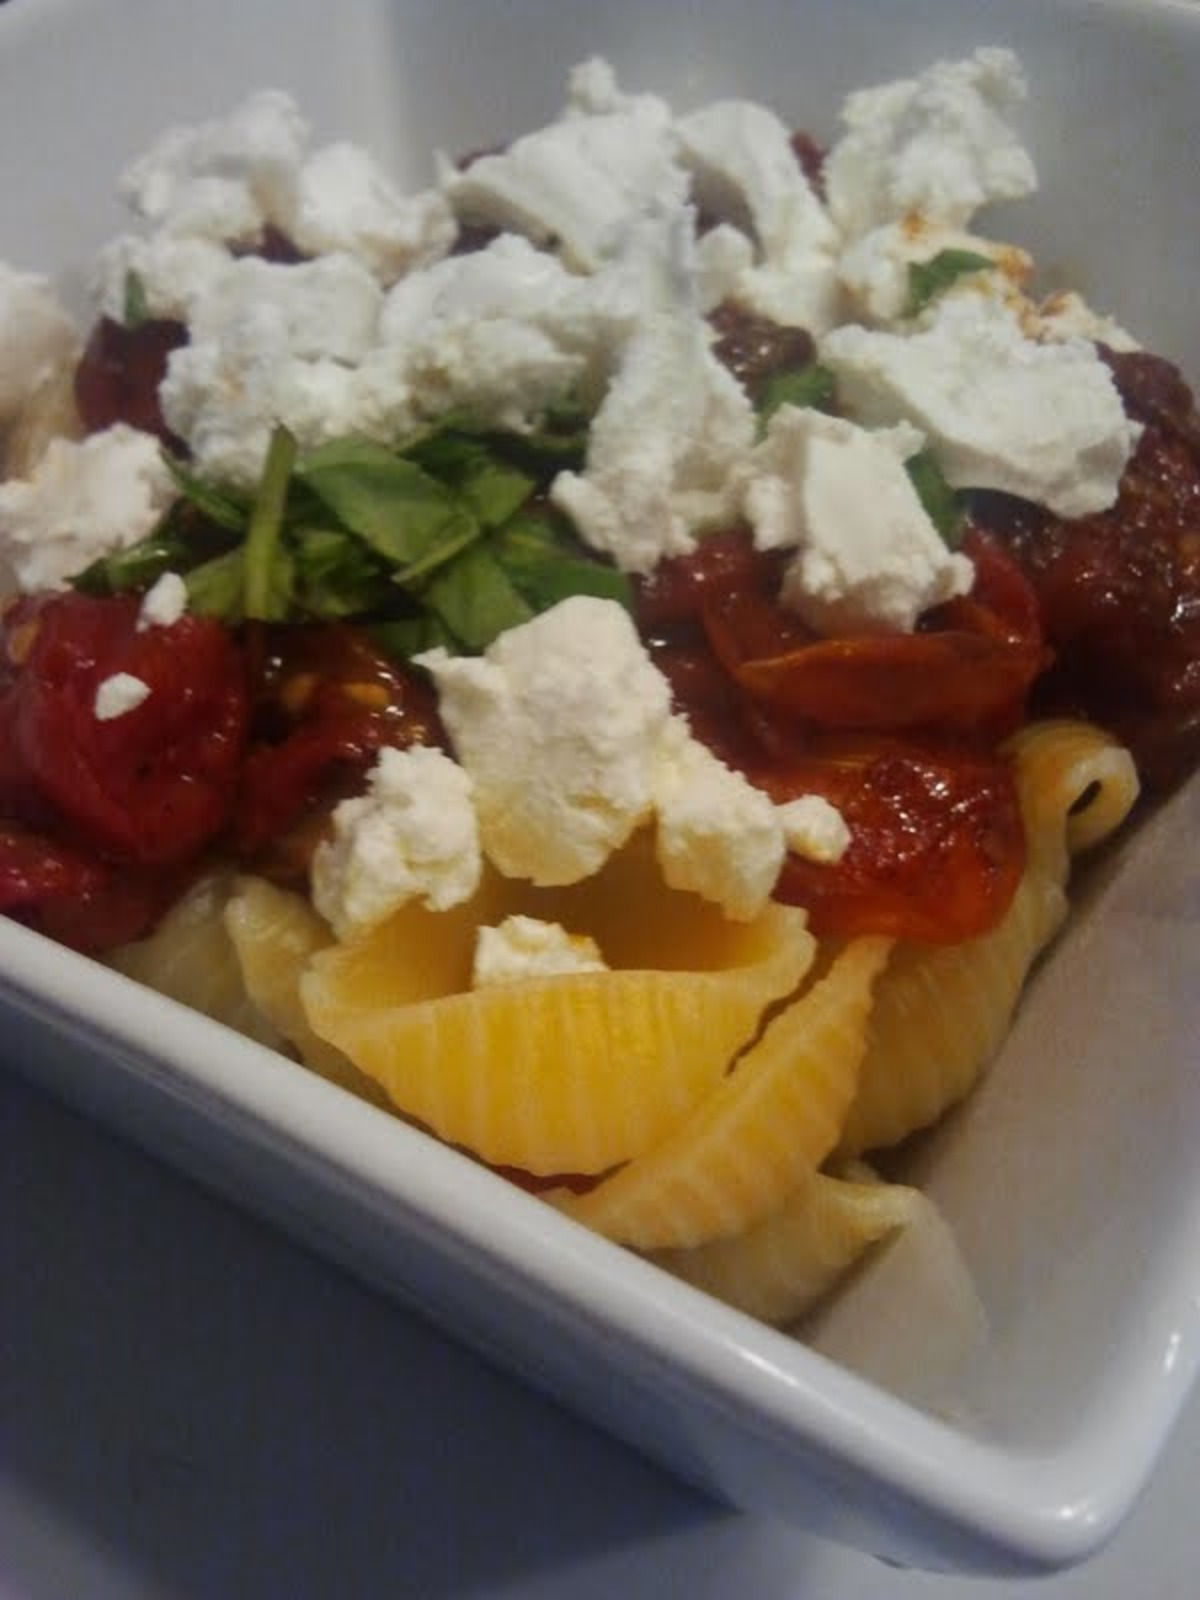 Penne With Slow Roasted Cherry Tomatoes and Goat Cheese recipe